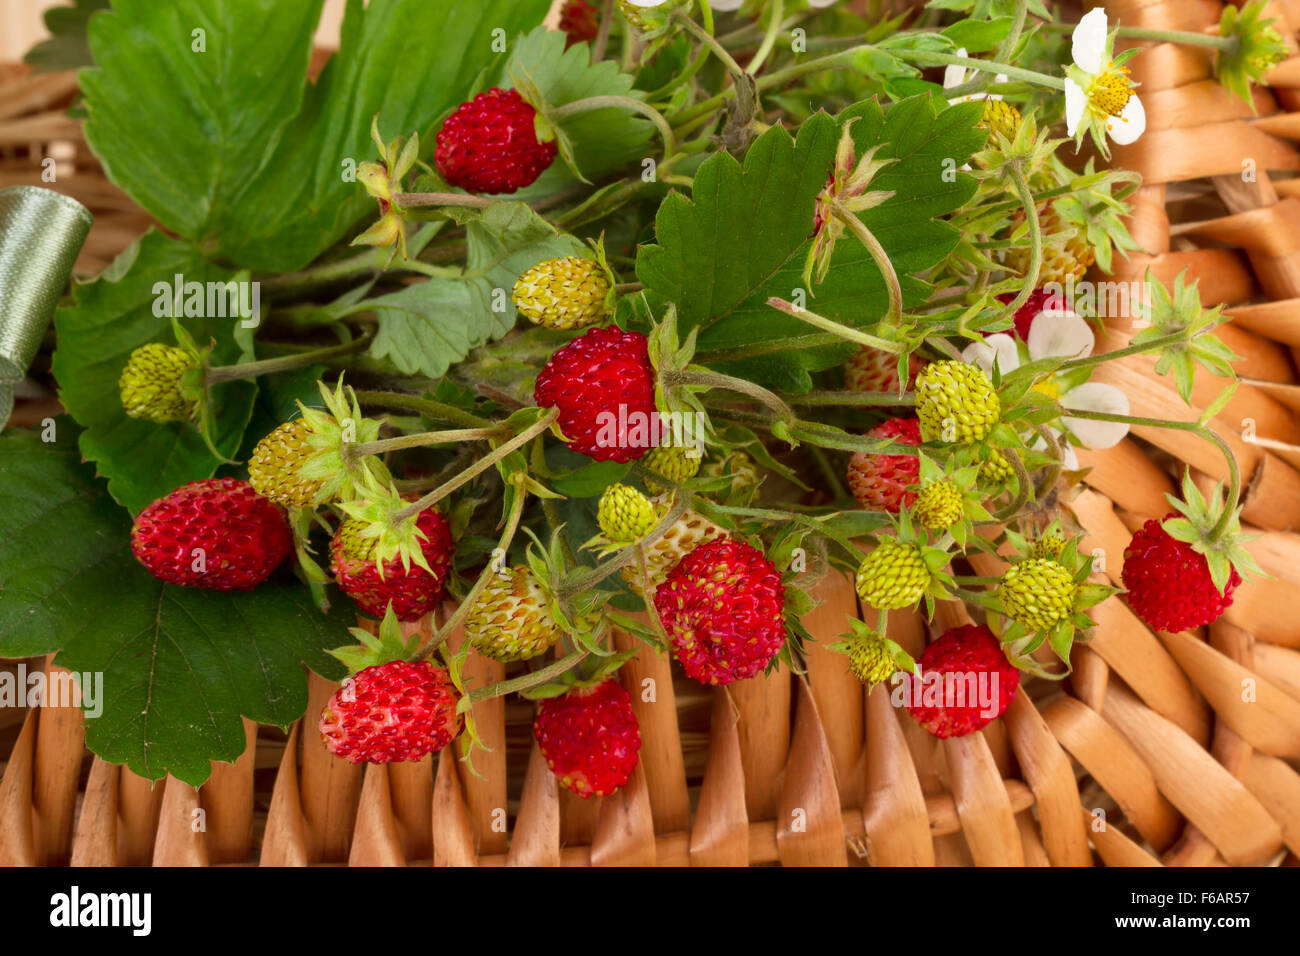 Woodland Strawberries in close-up Stock Photo